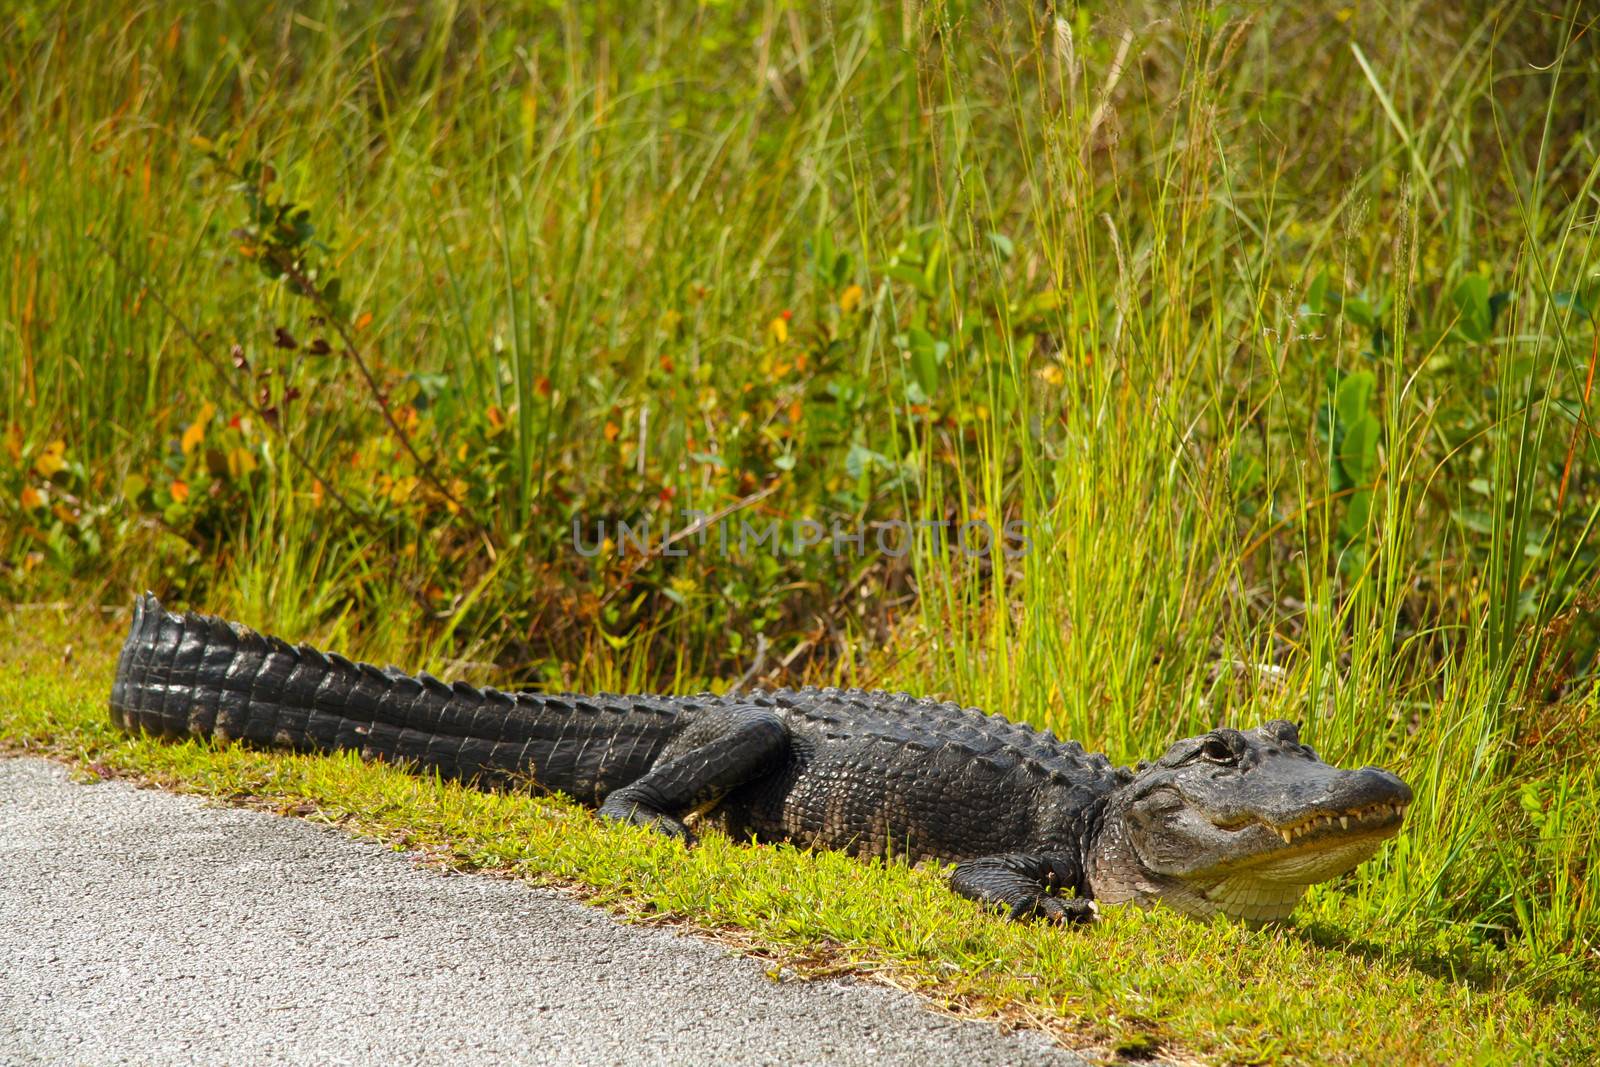 American alligator walking in the sun by the side of the road near the Everglades in Florida, US.